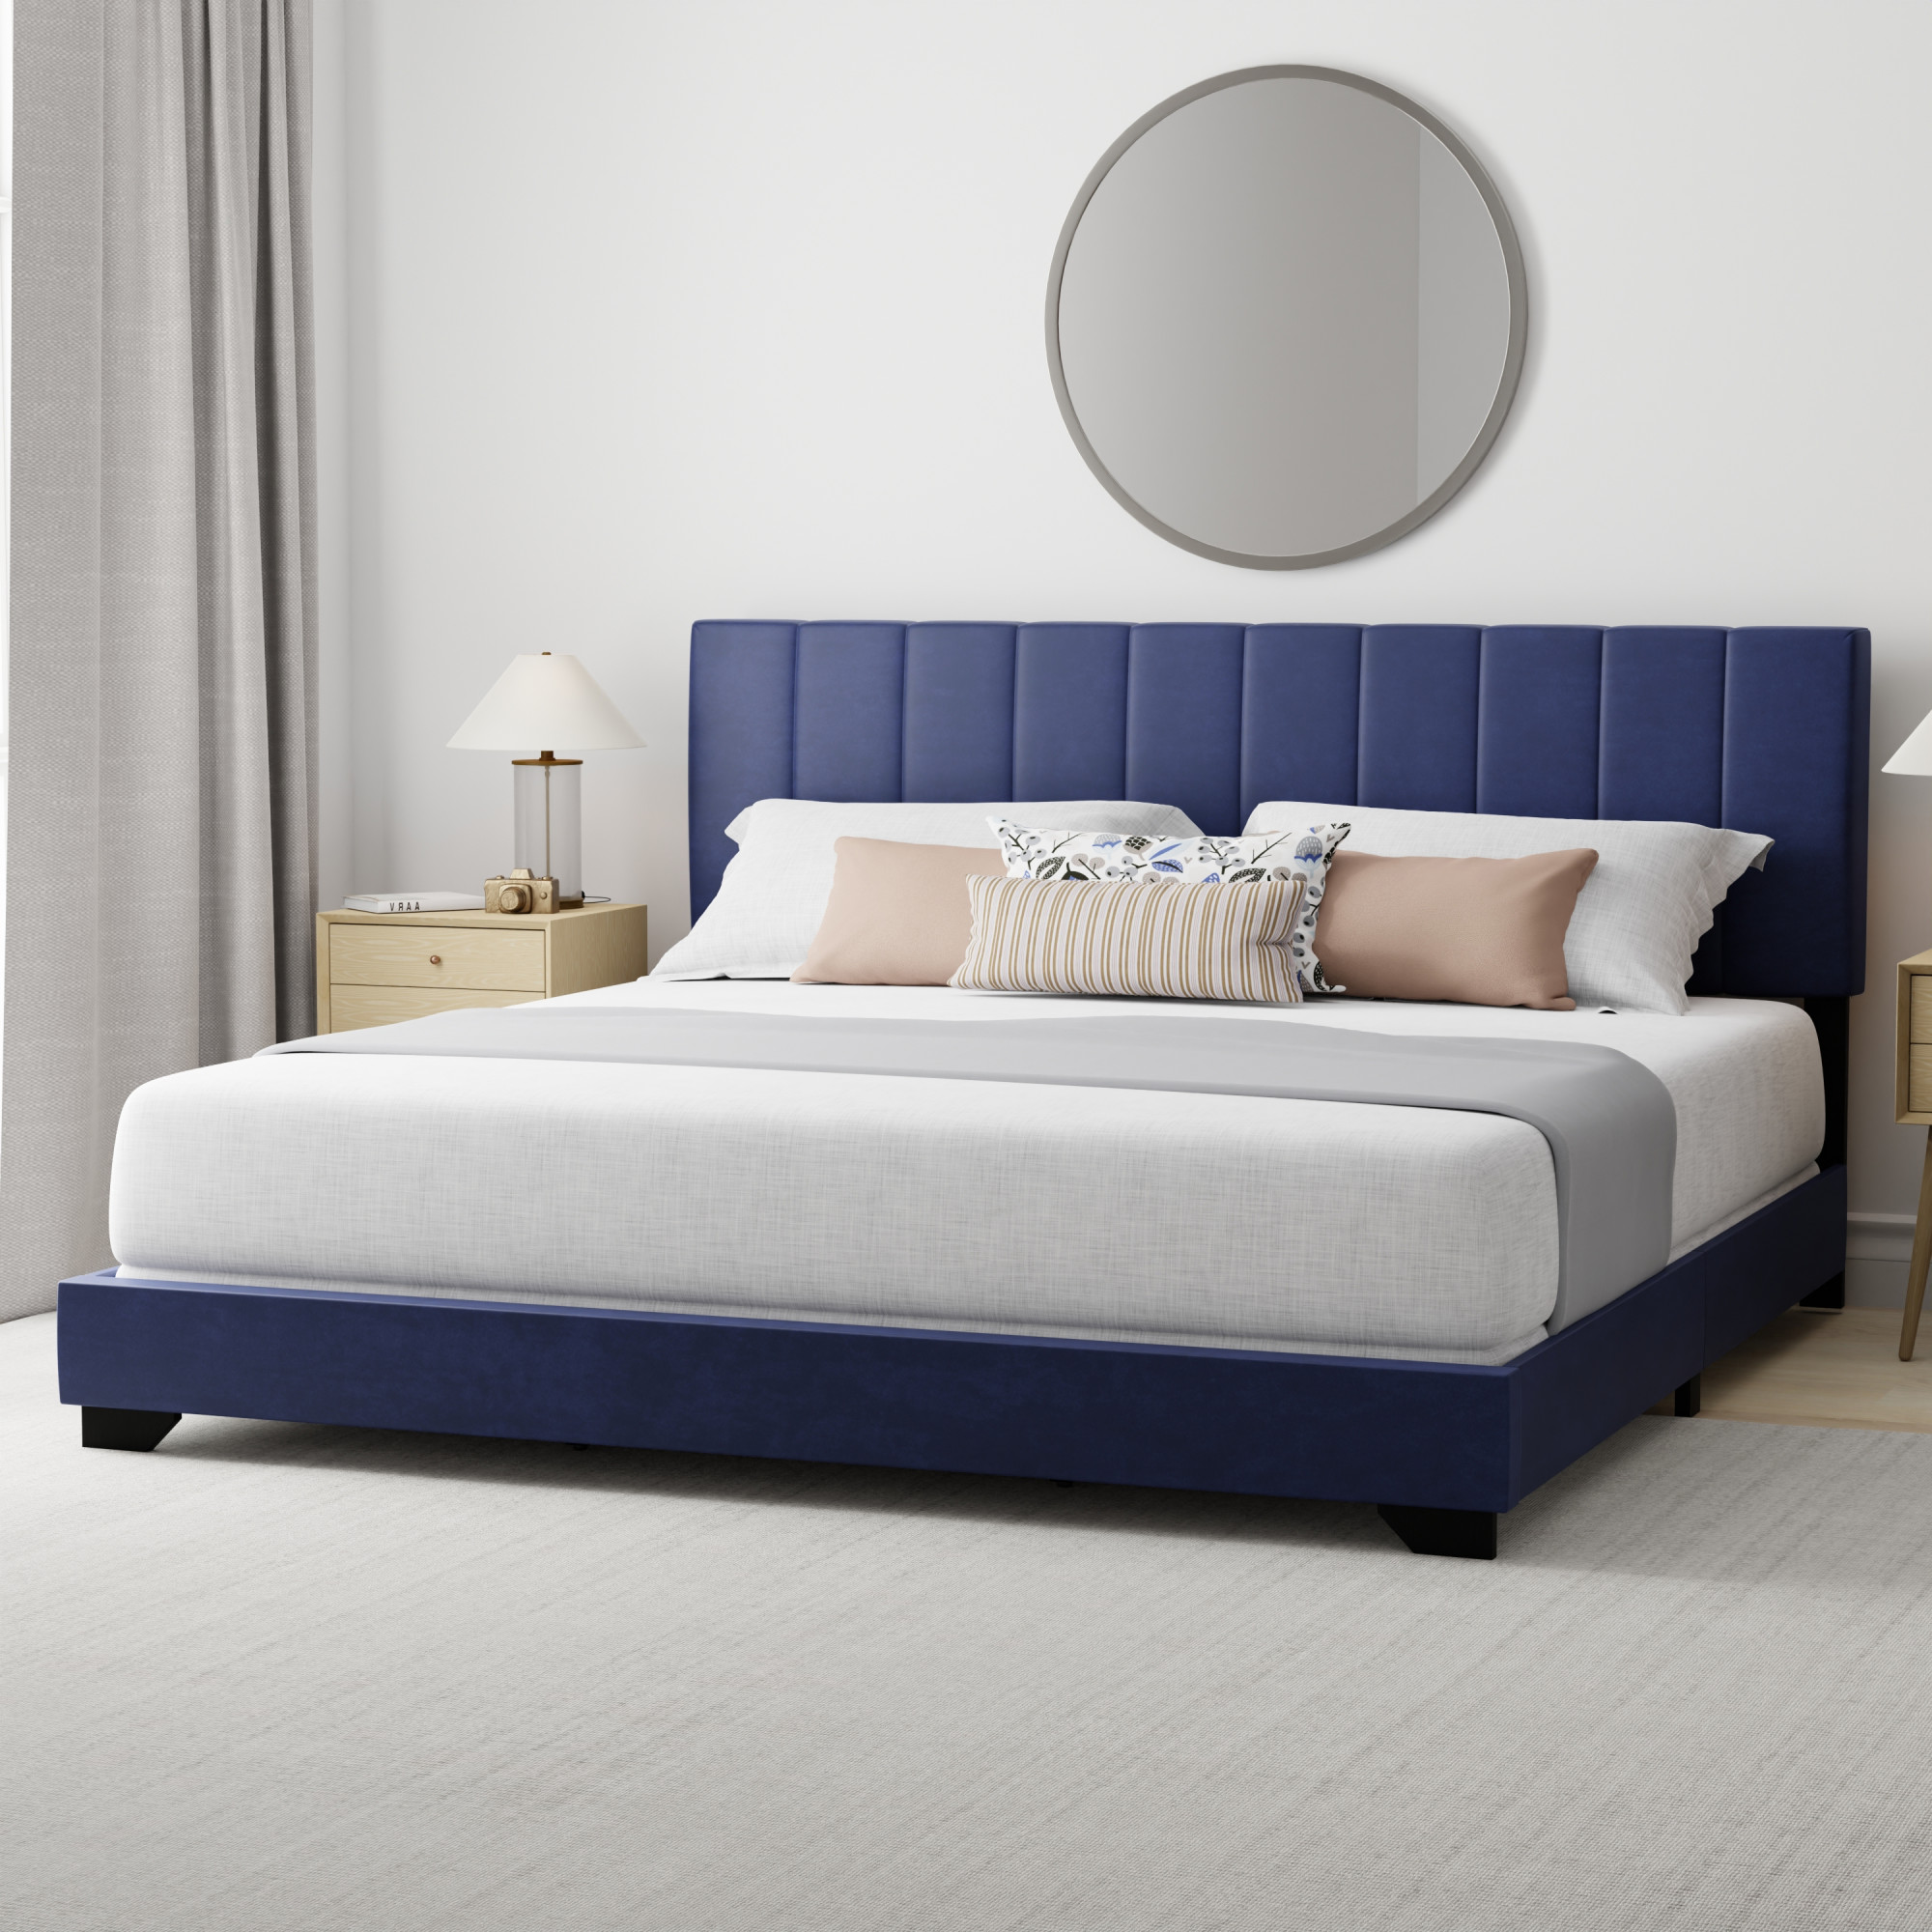 Reece Channel Stitched Upholstered King Bed, Sapphire, by Hillsdale Living Essentials - image 5 of 17